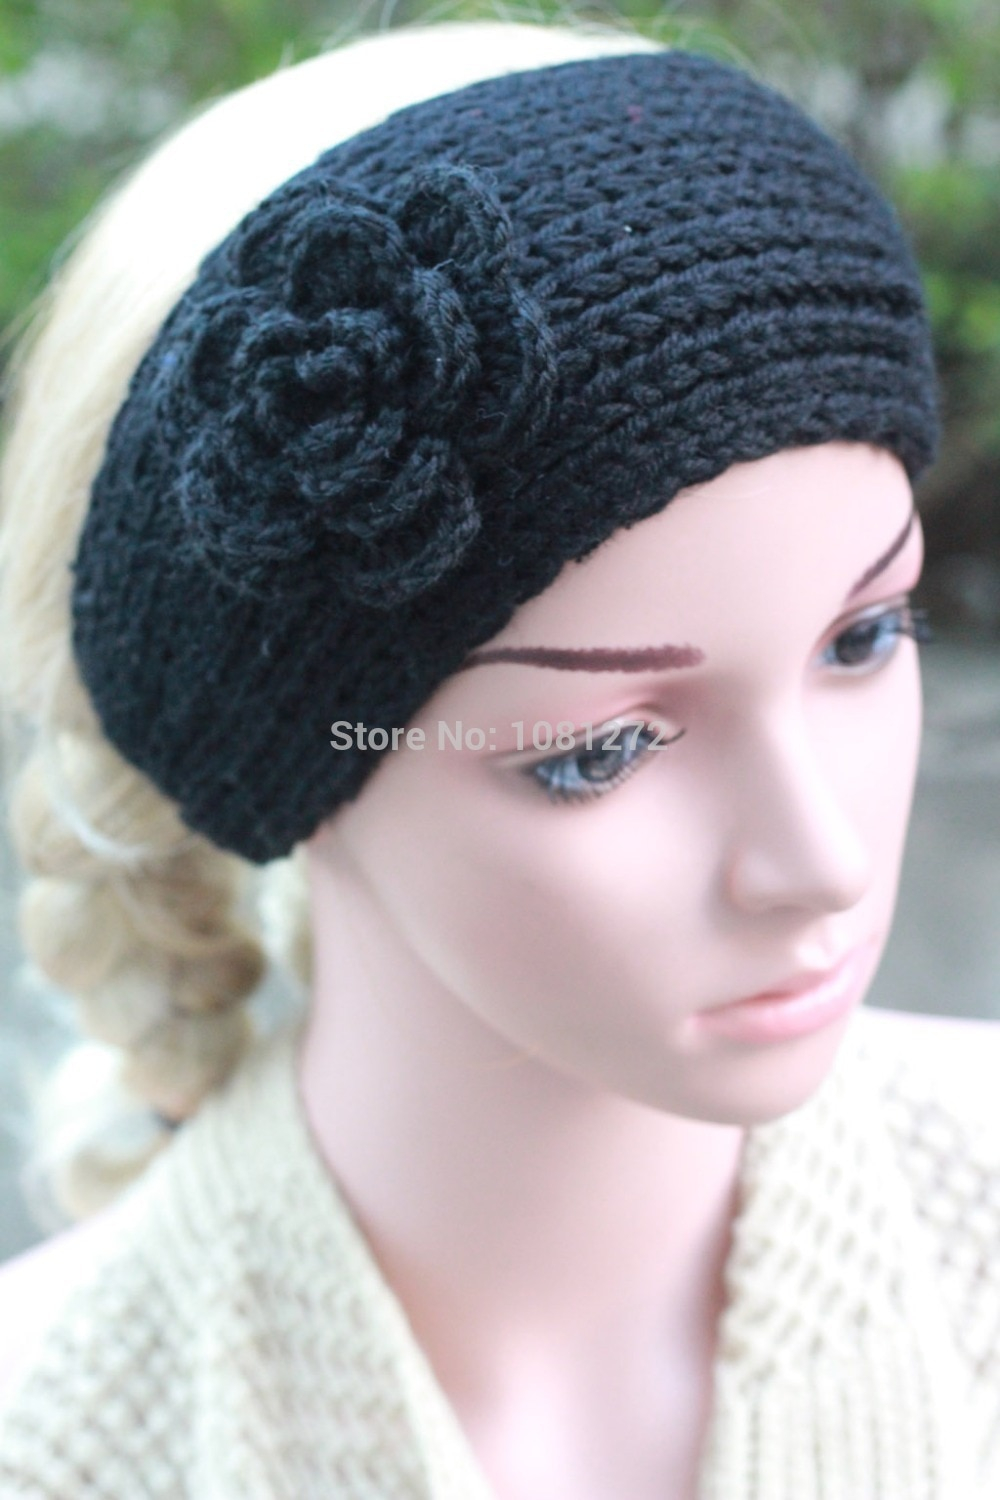 Knit Headband Pattern With Flower Us 529 Black Knit Headbandsmall Flower Headbandearwarmerhair Accessorieshead Wrapheadband Patternfall And Winter Hair Accessory In Womens